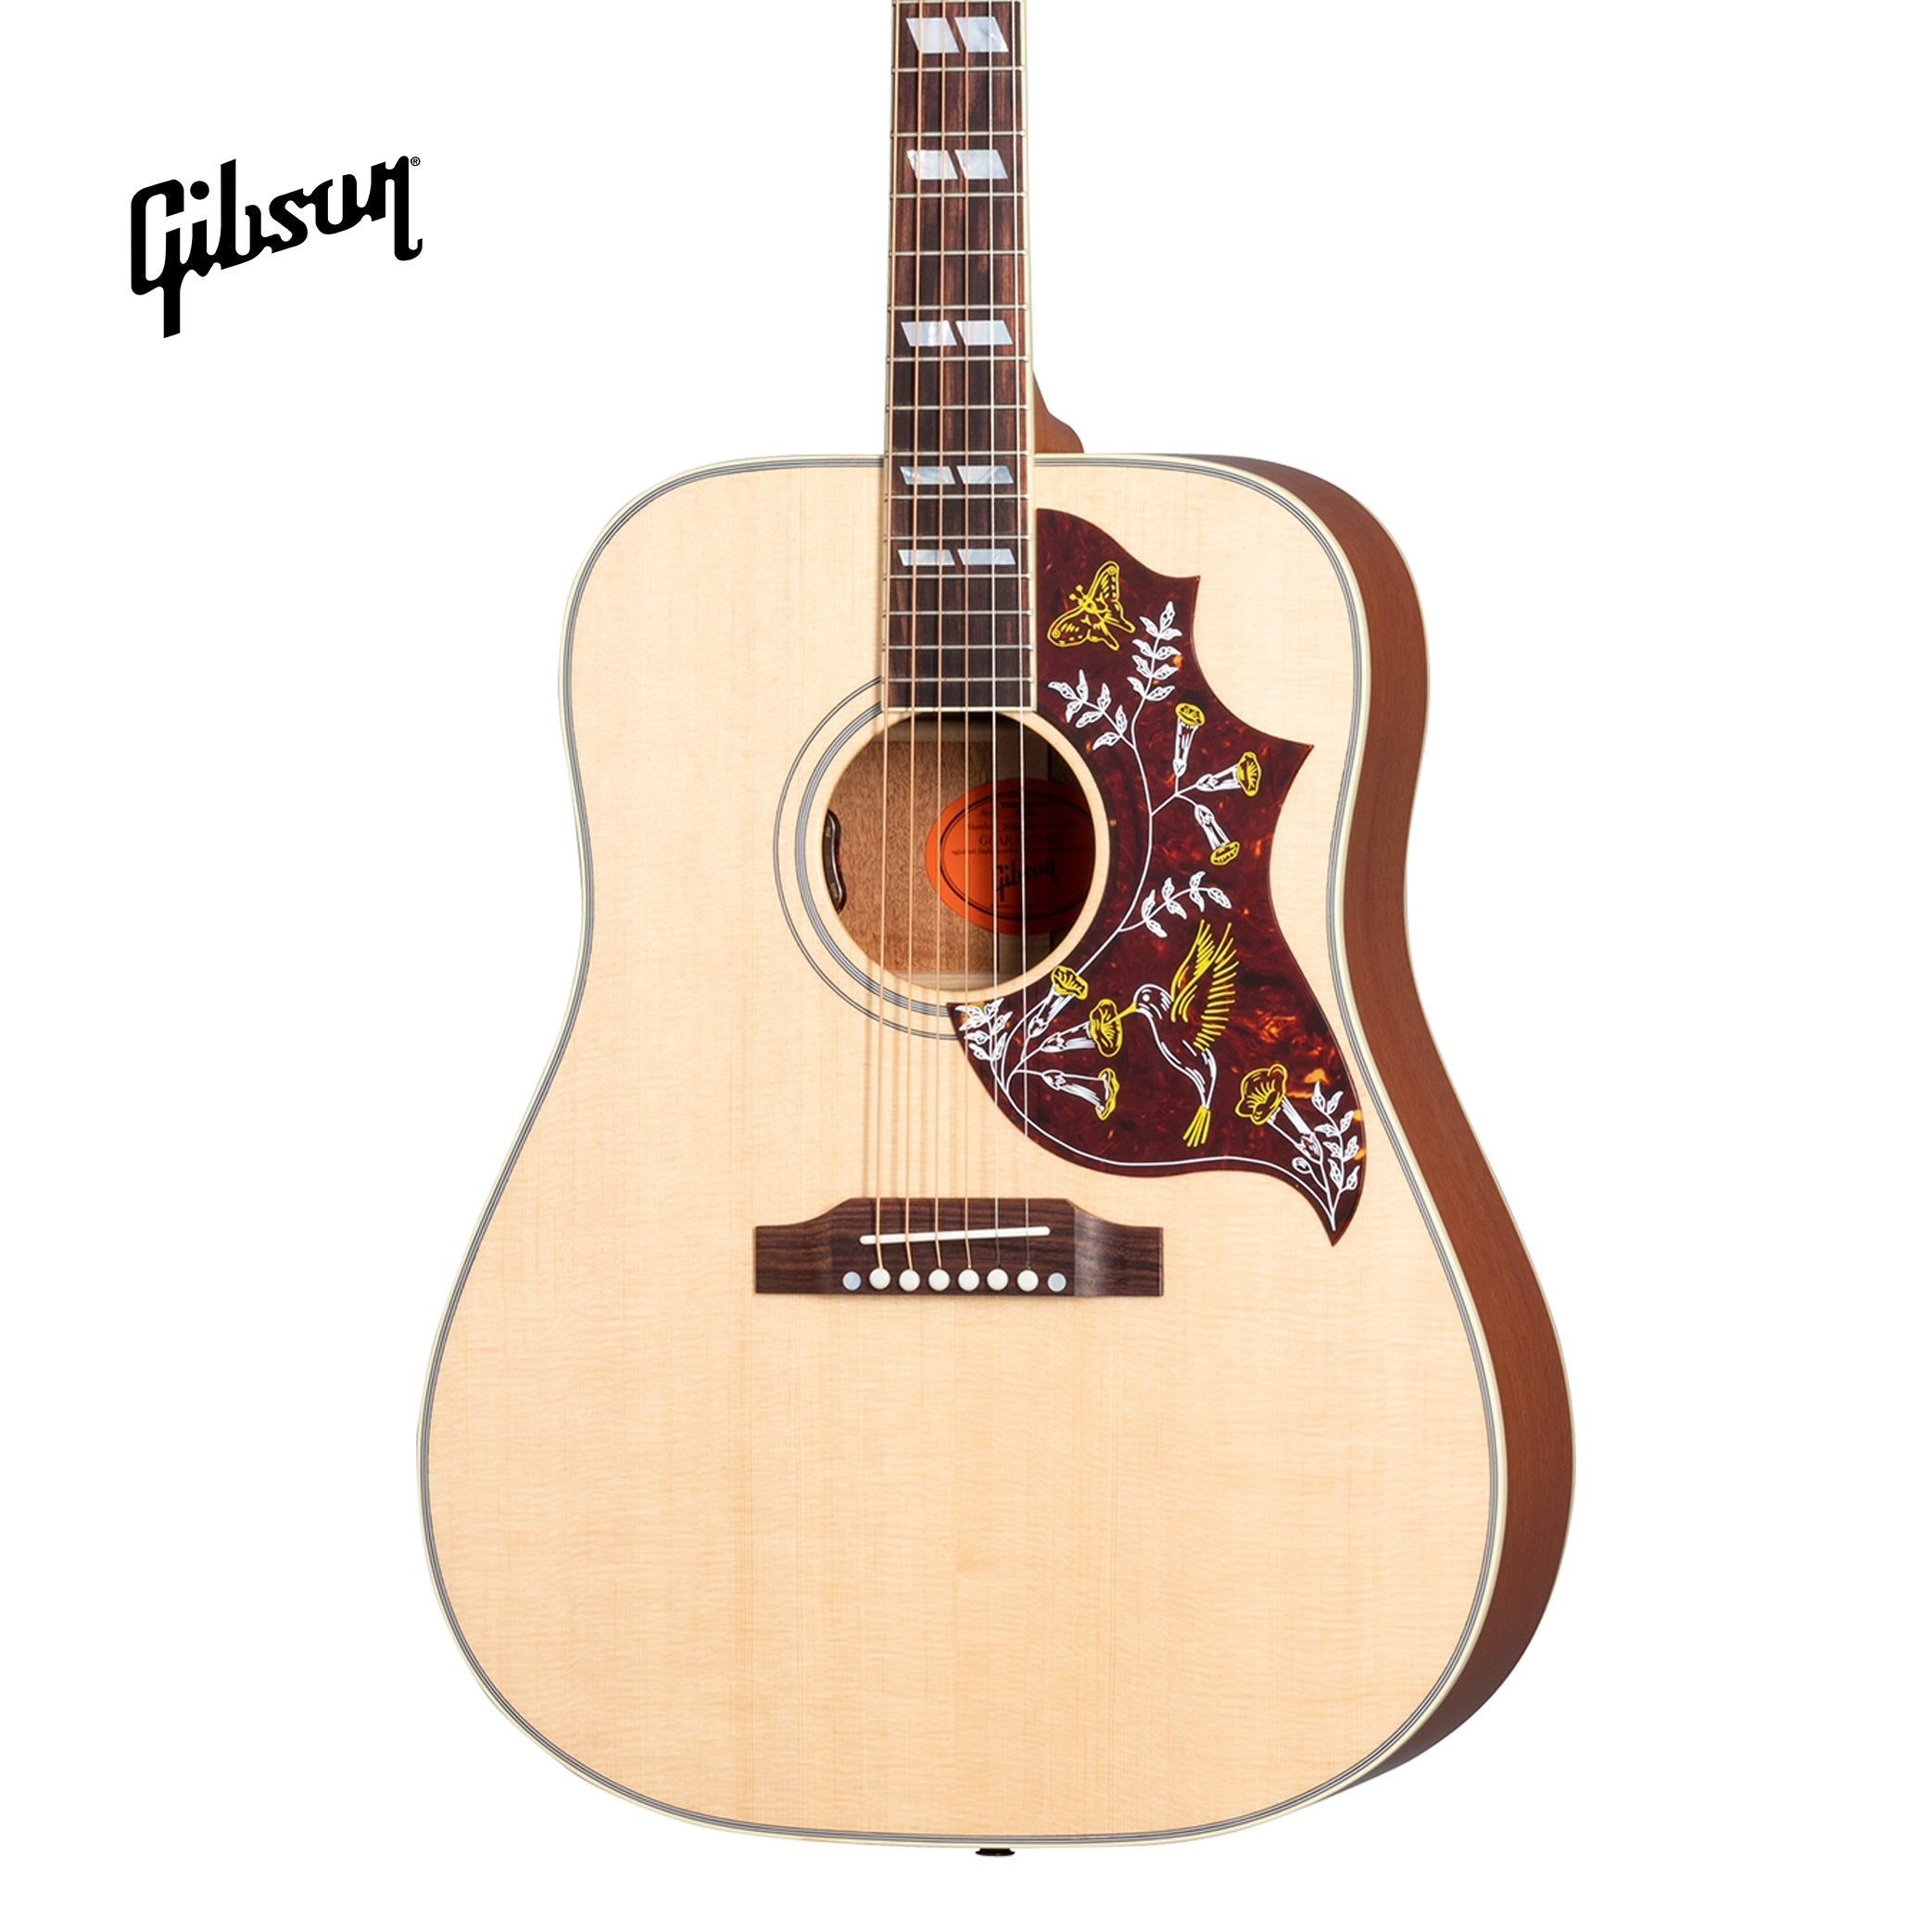 GIBSON HUMMINGBIRD FADED ACOUSTIC-ELECTRIC GUITAR - ANTIQUE NATURAL